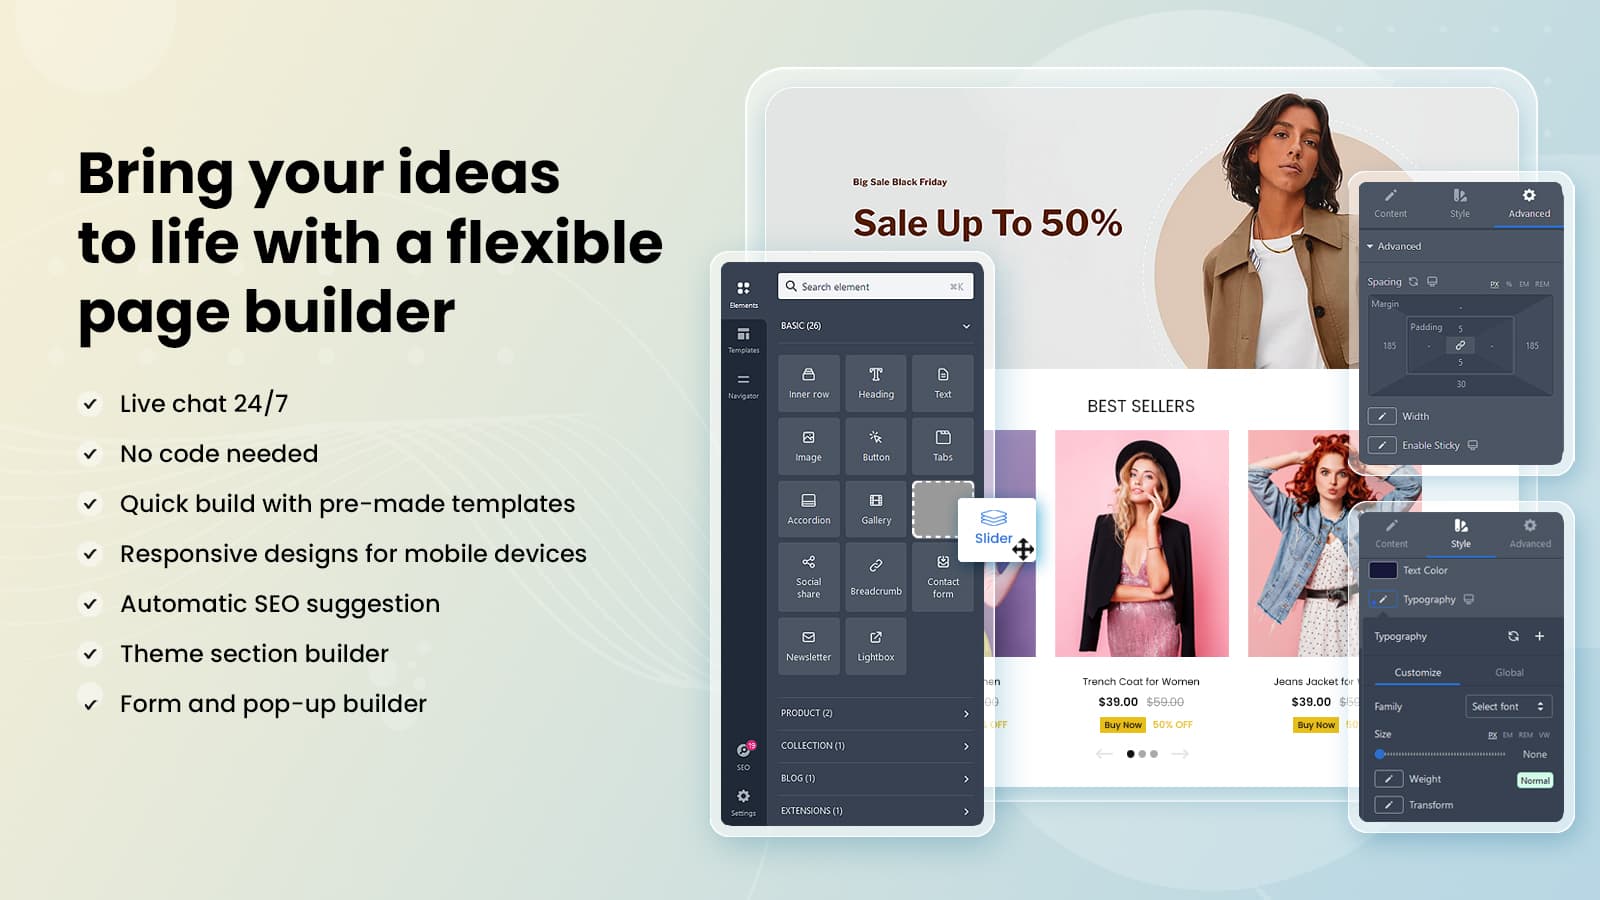 Flexible page builder, theme section, and pop-up builder